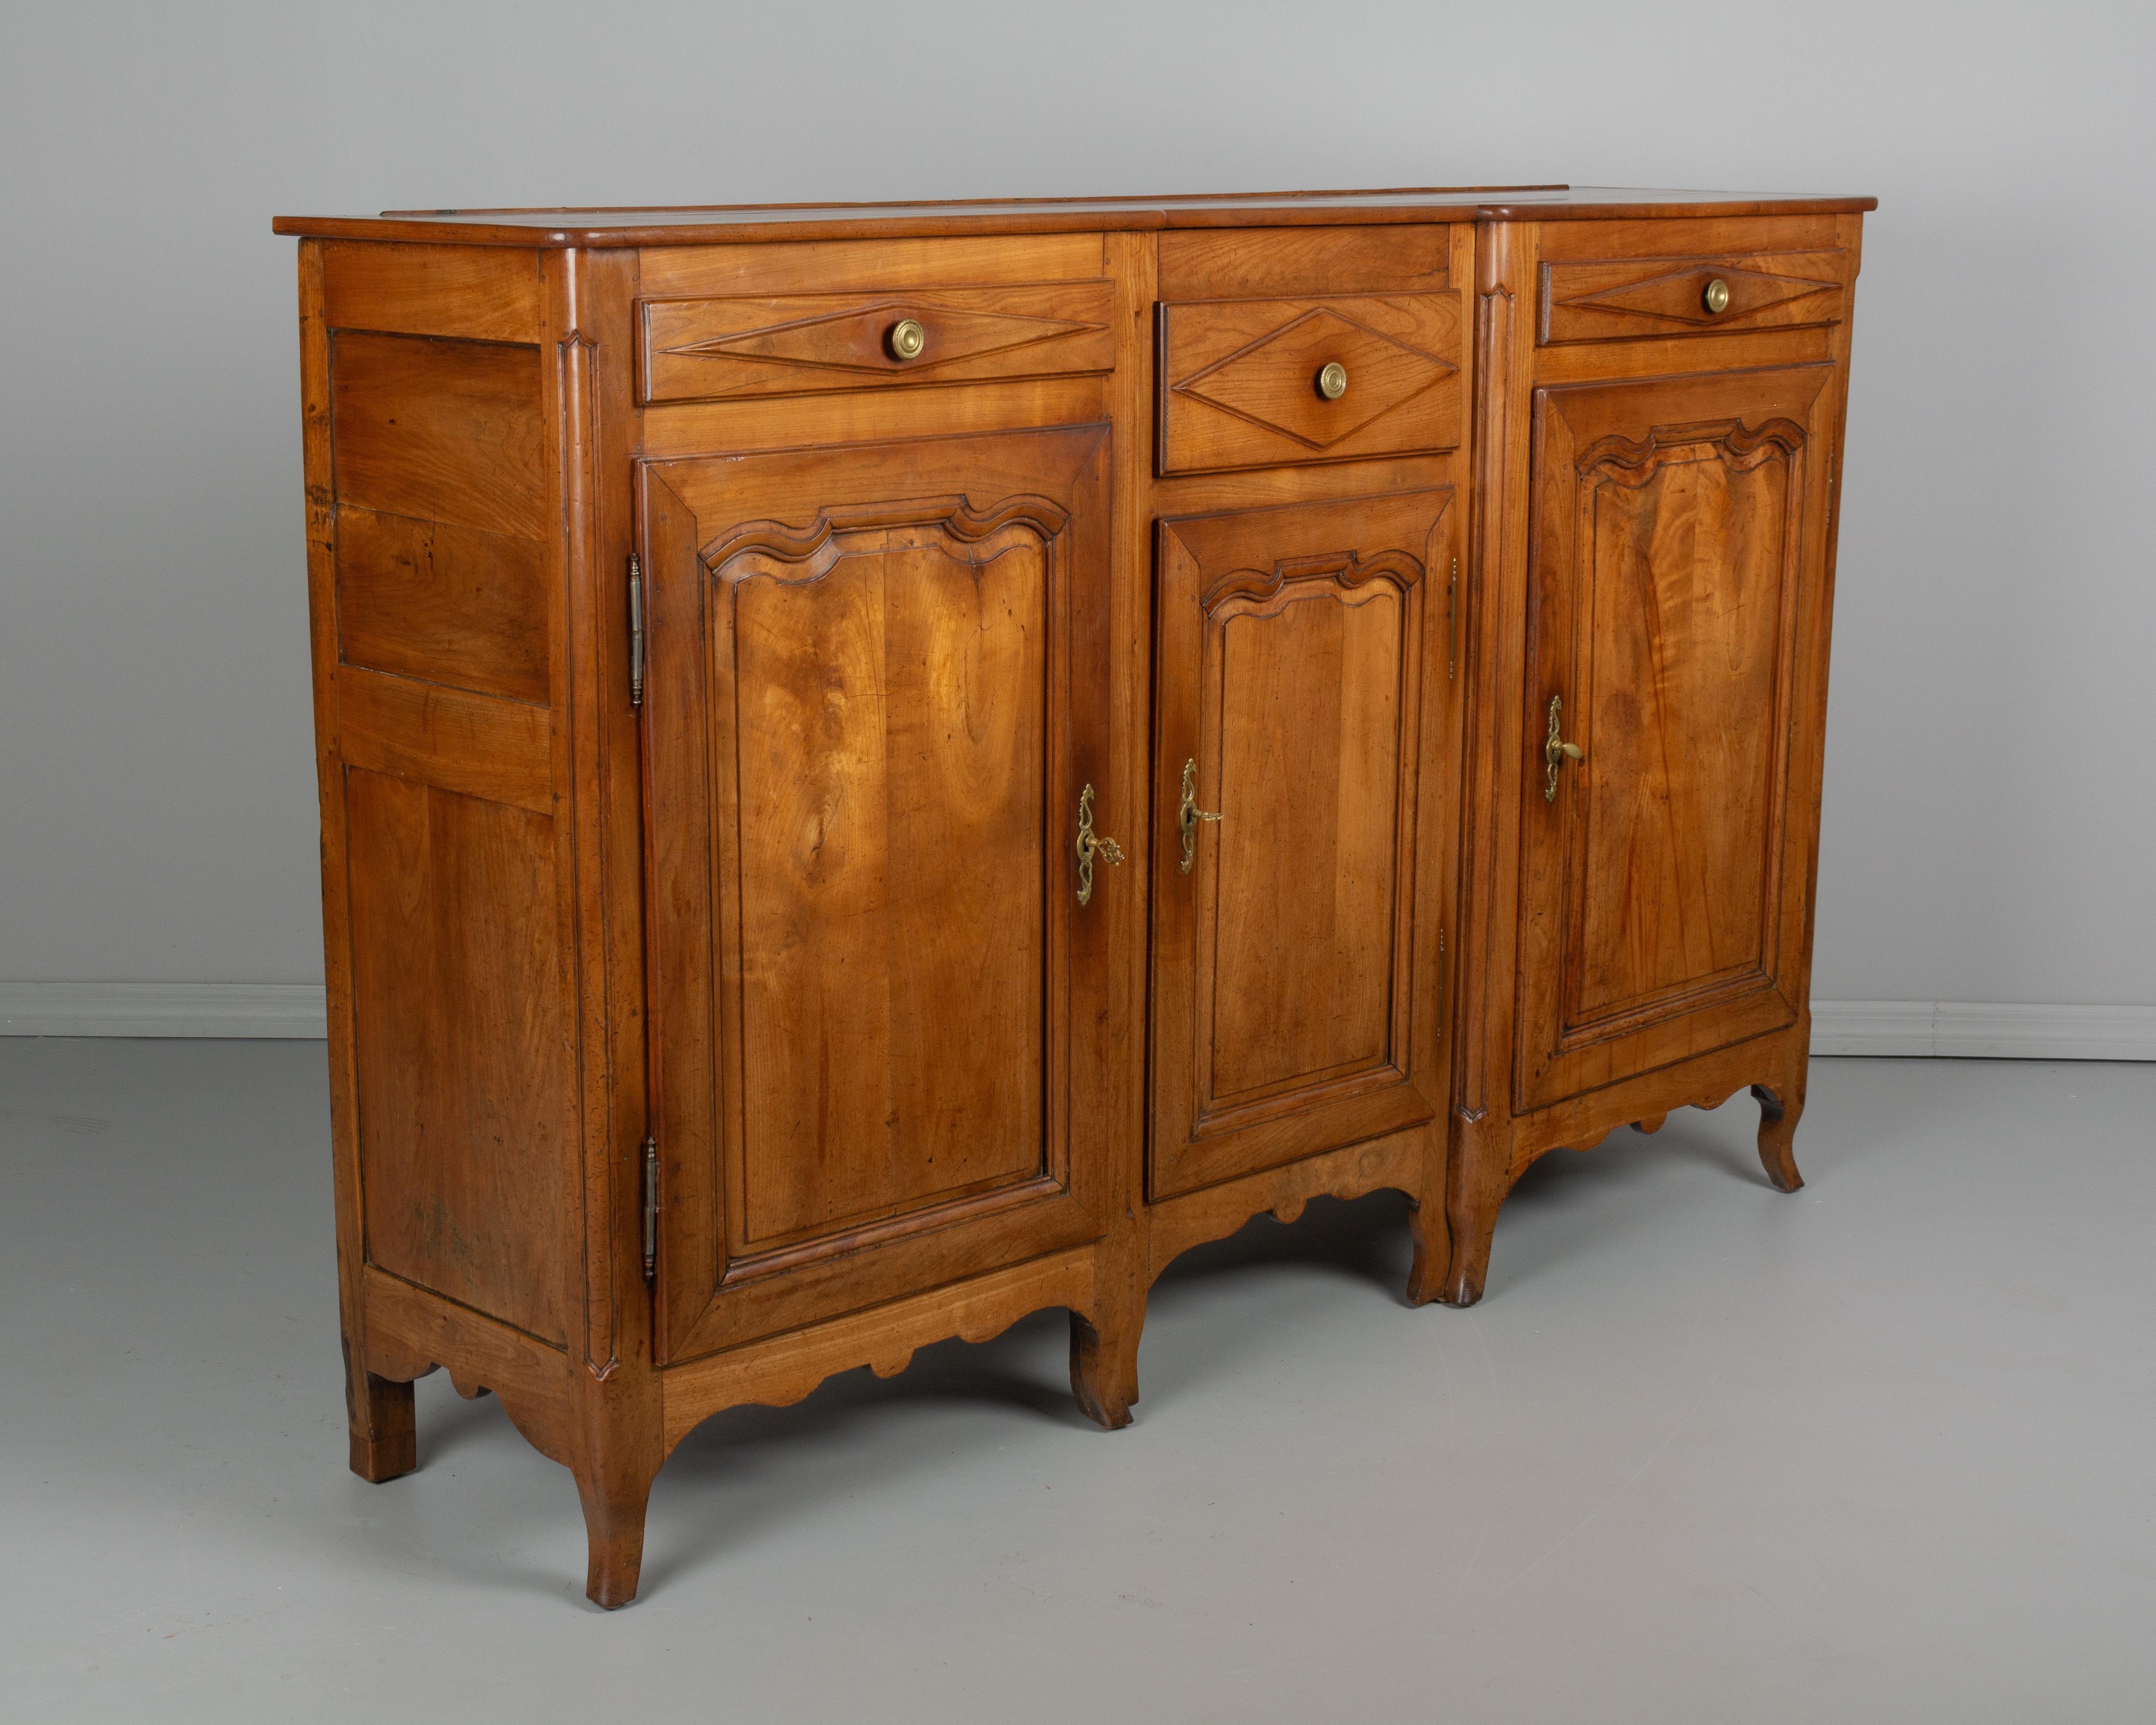 An 19th century Country French enfilade, or sideboard from Picardie (Northern France) made of solid cherry wood. Simple hand-carved details and raised panel doors. Three doors open to five interior shelves providing ample storage. Three drawers with